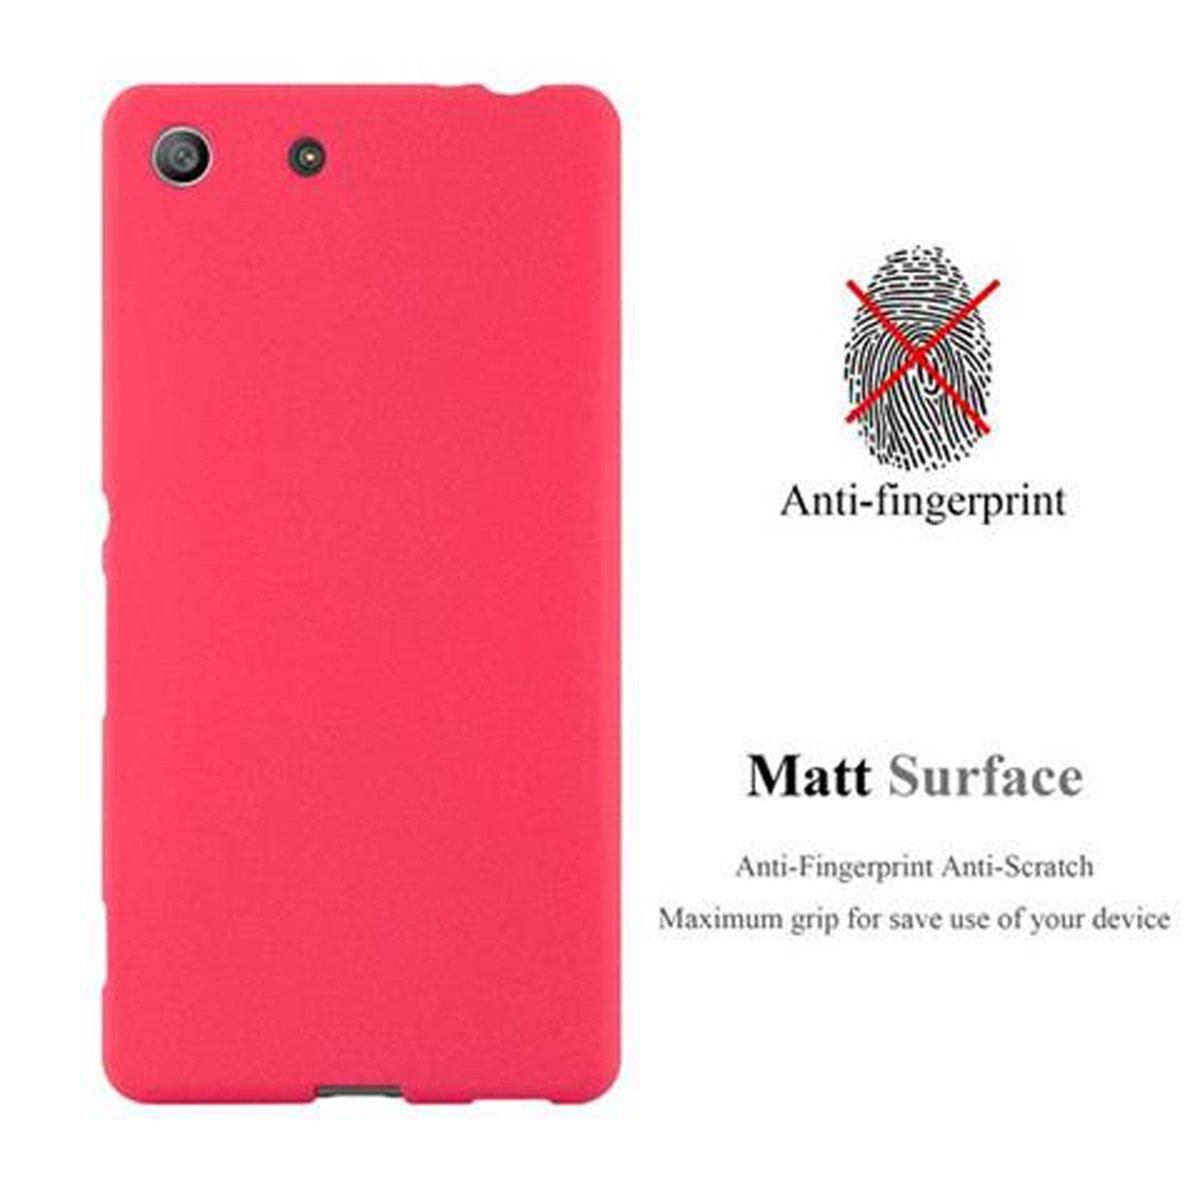 CADORABO TPU Frosted ROT FROST M5, Sony, Xperia Backcover, Schutzhülle